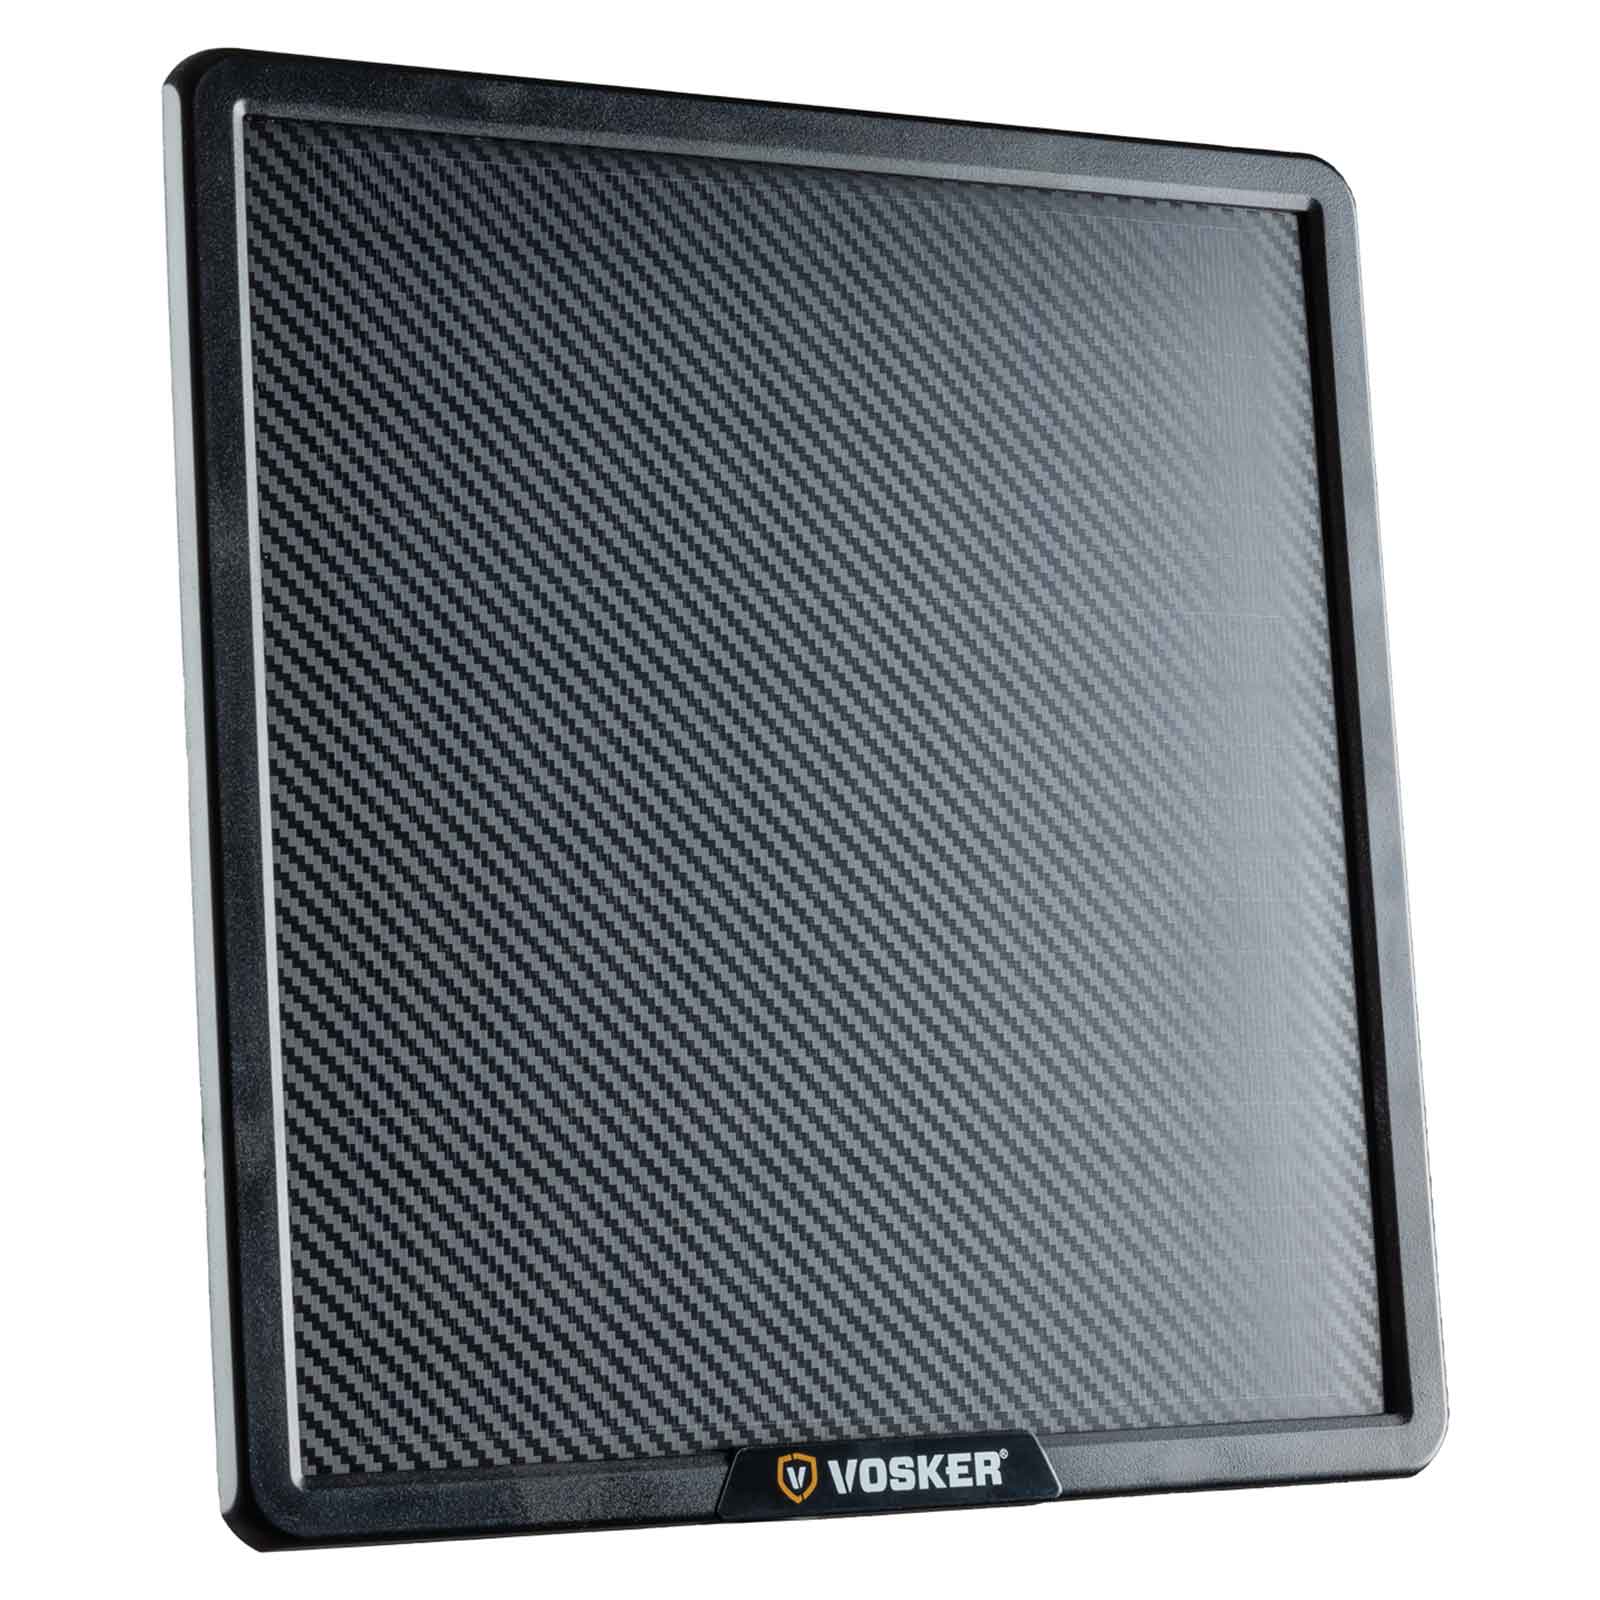 Power Bank solaire Vosker